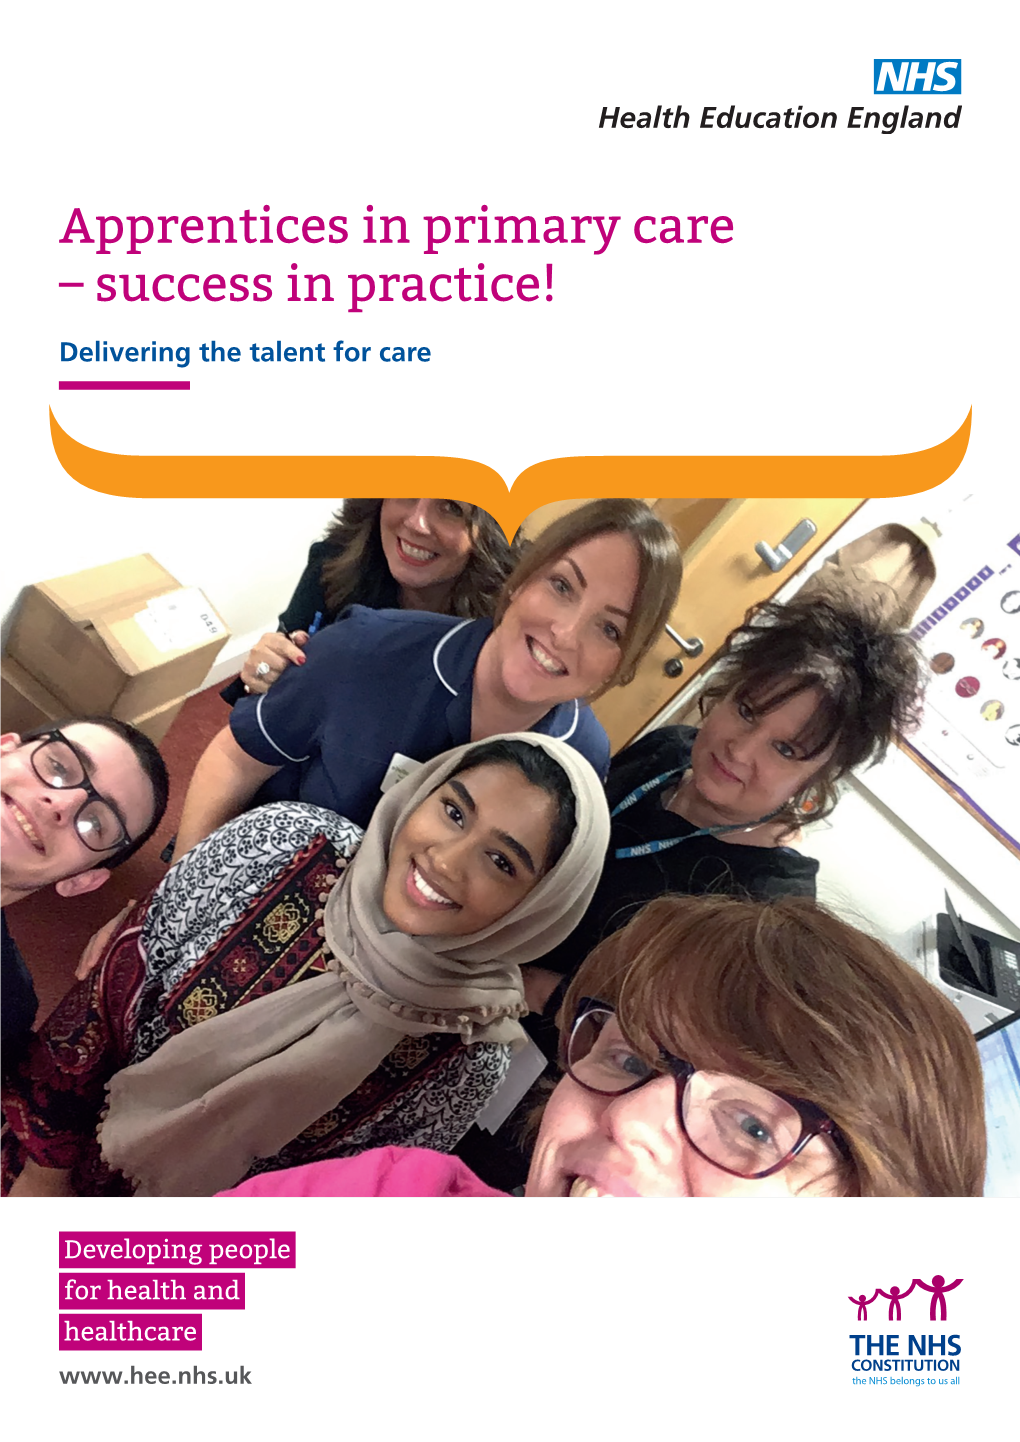 Apprentices in Primary Care – Success in Practice! Delivering the Talent for Care